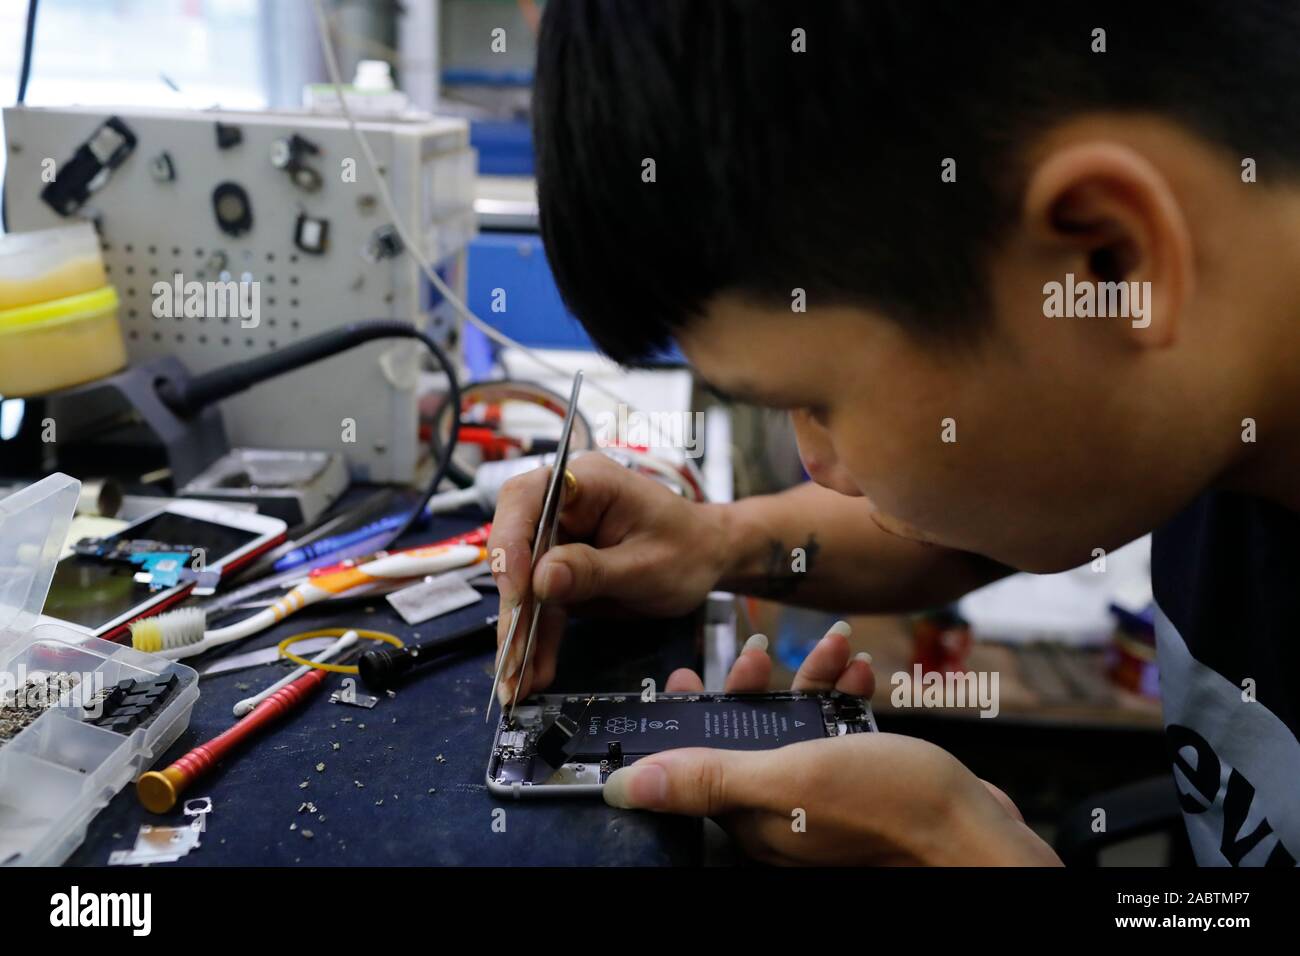 Mobile phone repair. Man is changing a broken mobile phone display in the service.  Hoi An. Vietnam. Stock Photo